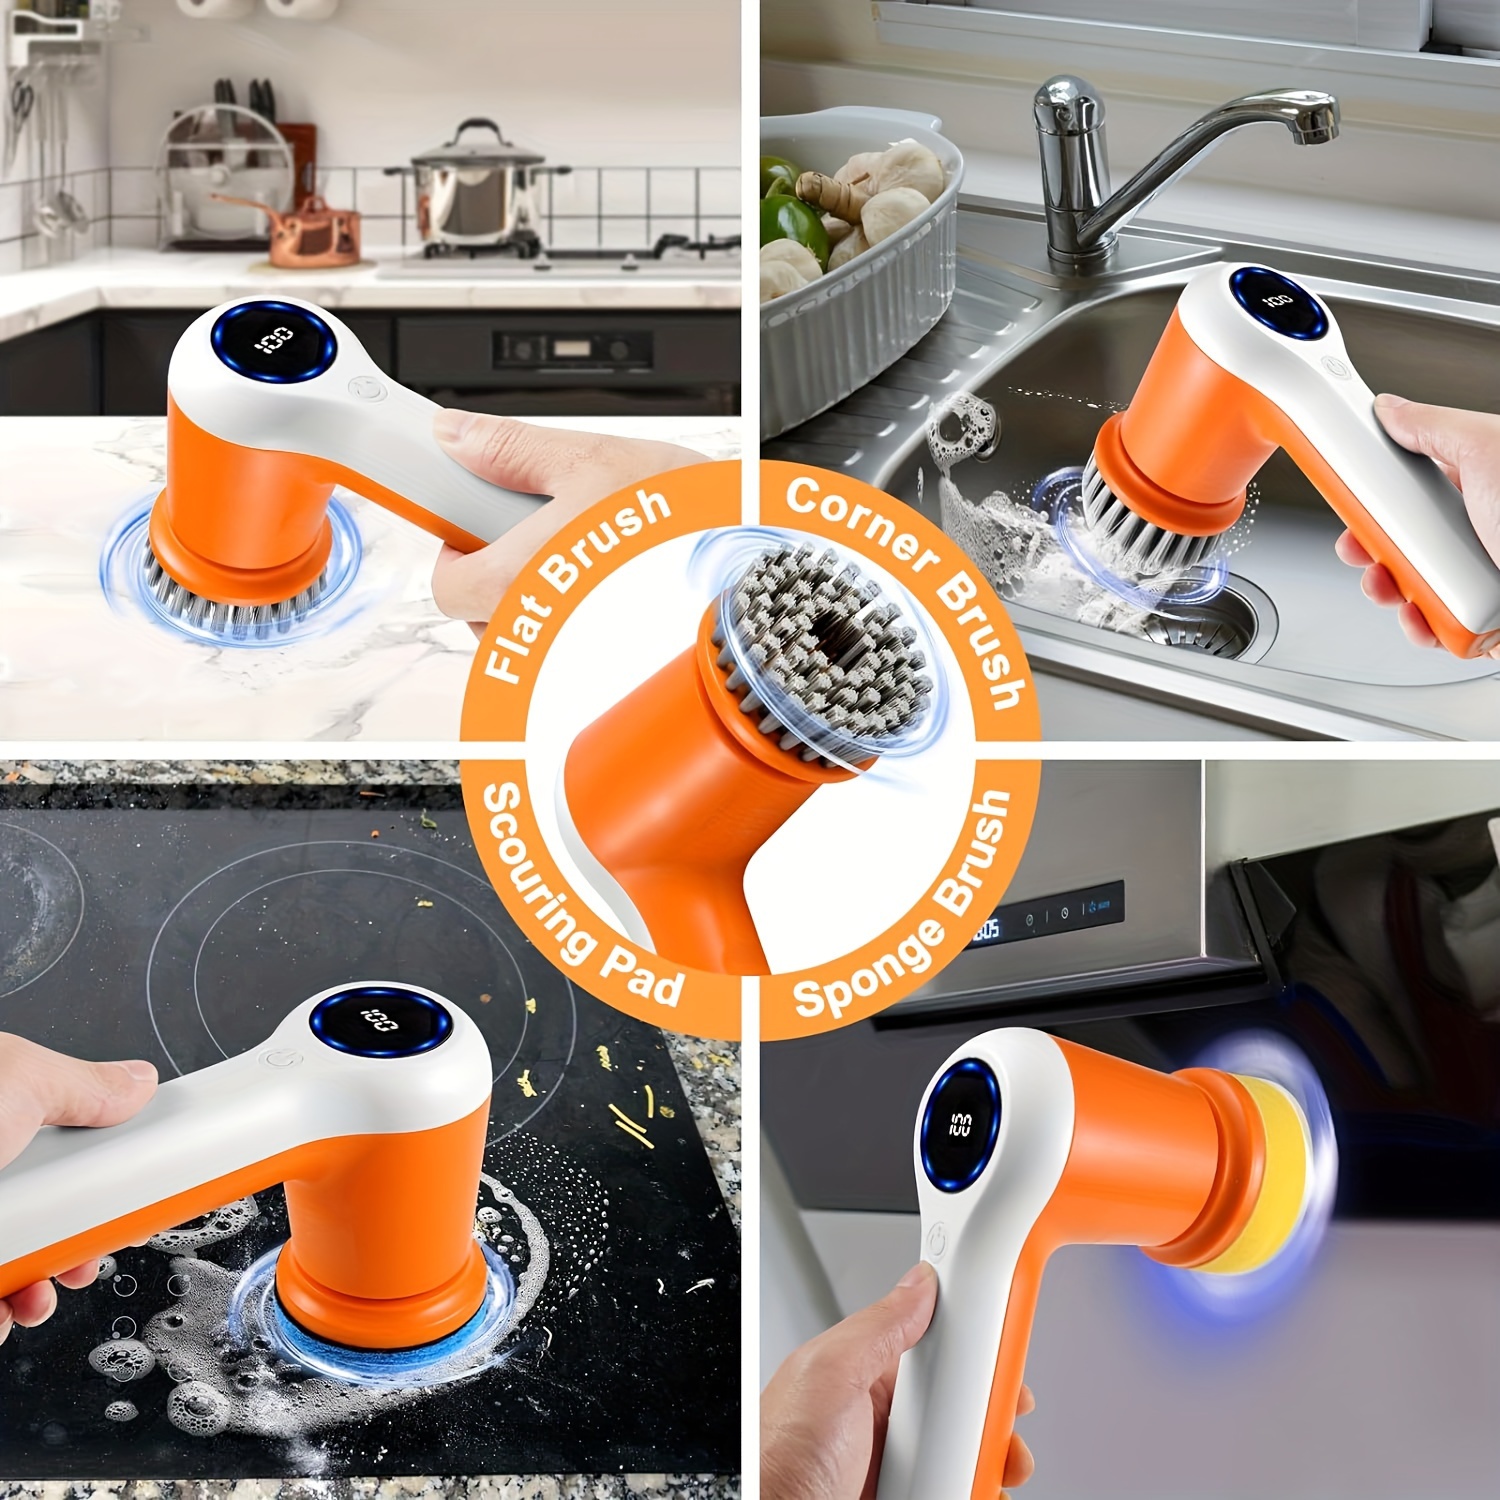 

Electric Spin Scrubber, Power Scrubber Cordless Electric Shower Scrubber With Digital Display And 5 Replaceable Heads, 2 Adjustable Speeds, Cleaning Brush For Bathtub, Floor, Tile, Window